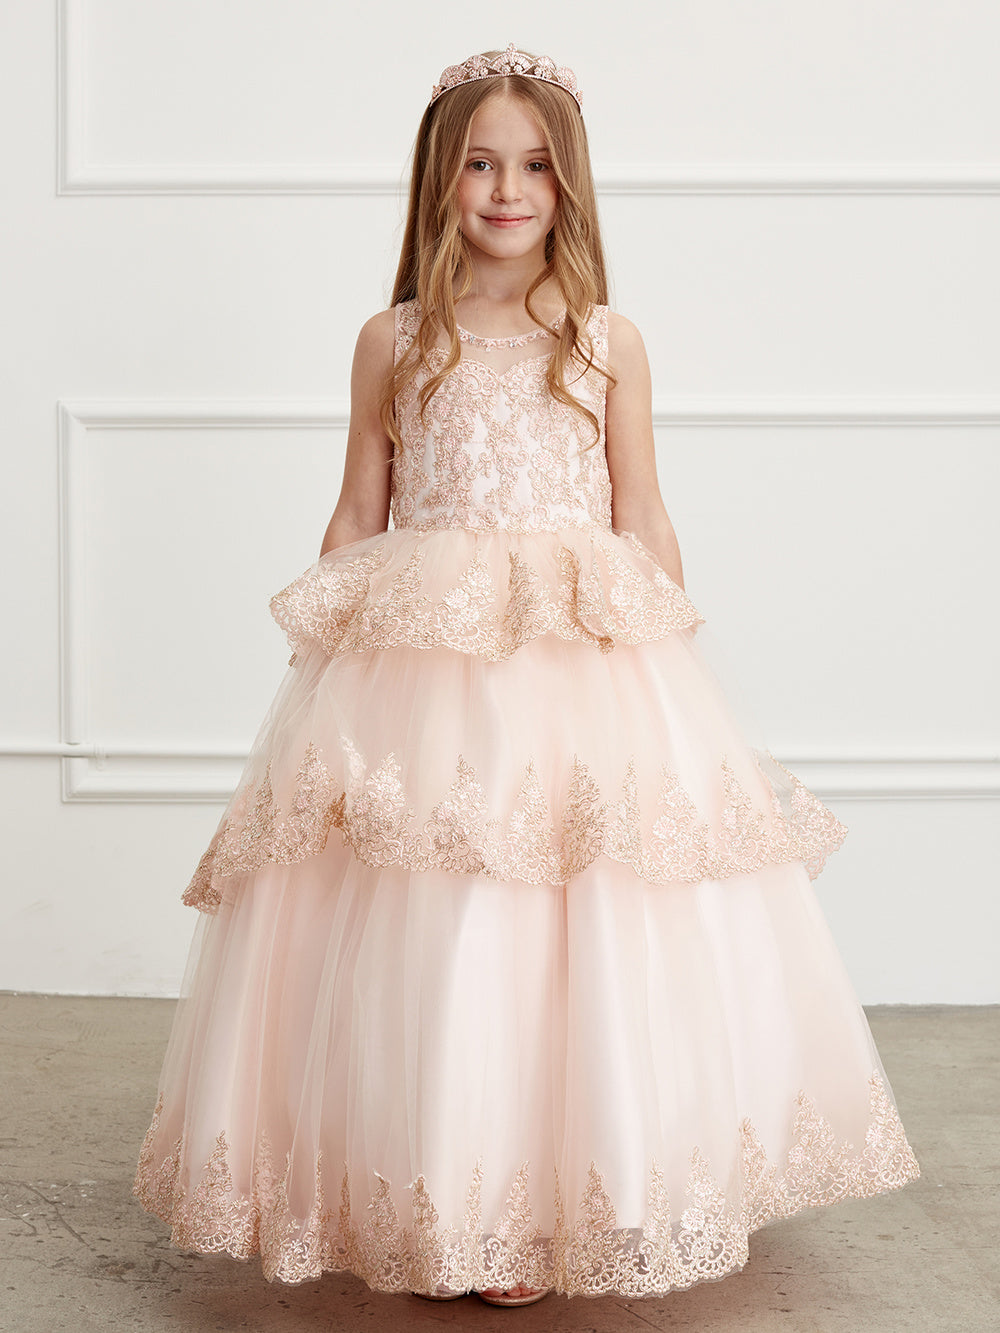 Kingdom.Boutique Gold Tulle Long Sleeves Flower Girl Dress for Special Occasion Bridesmaid Party Wedding Pageant First Communion Photoshoot Christmas